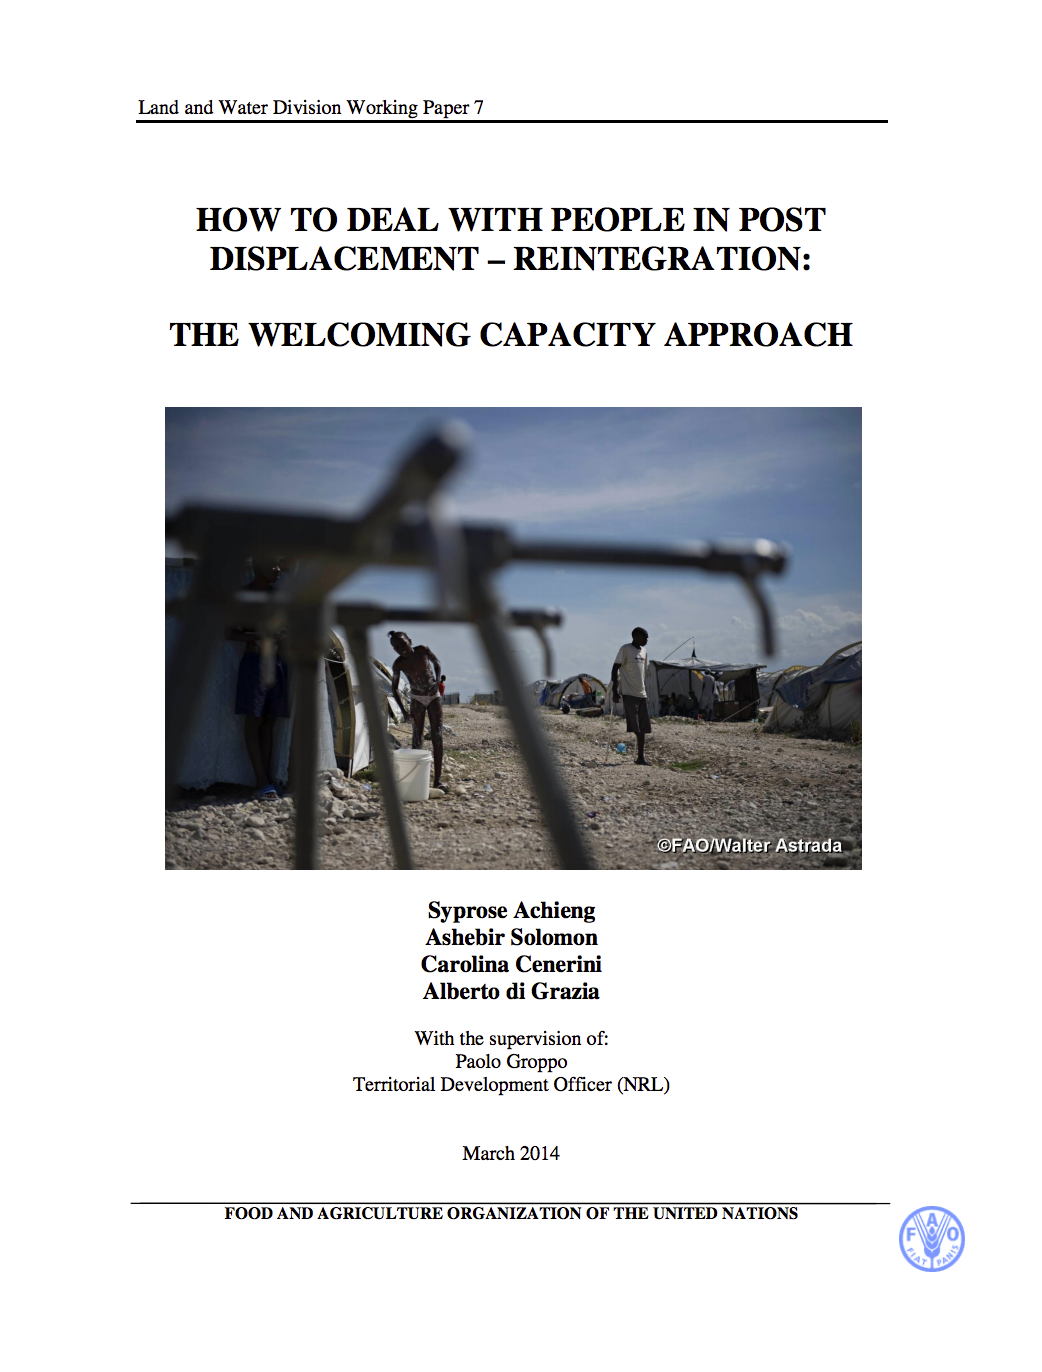 How to deal with people in post displacement - reintegration: the welcoming capacity approach cover image